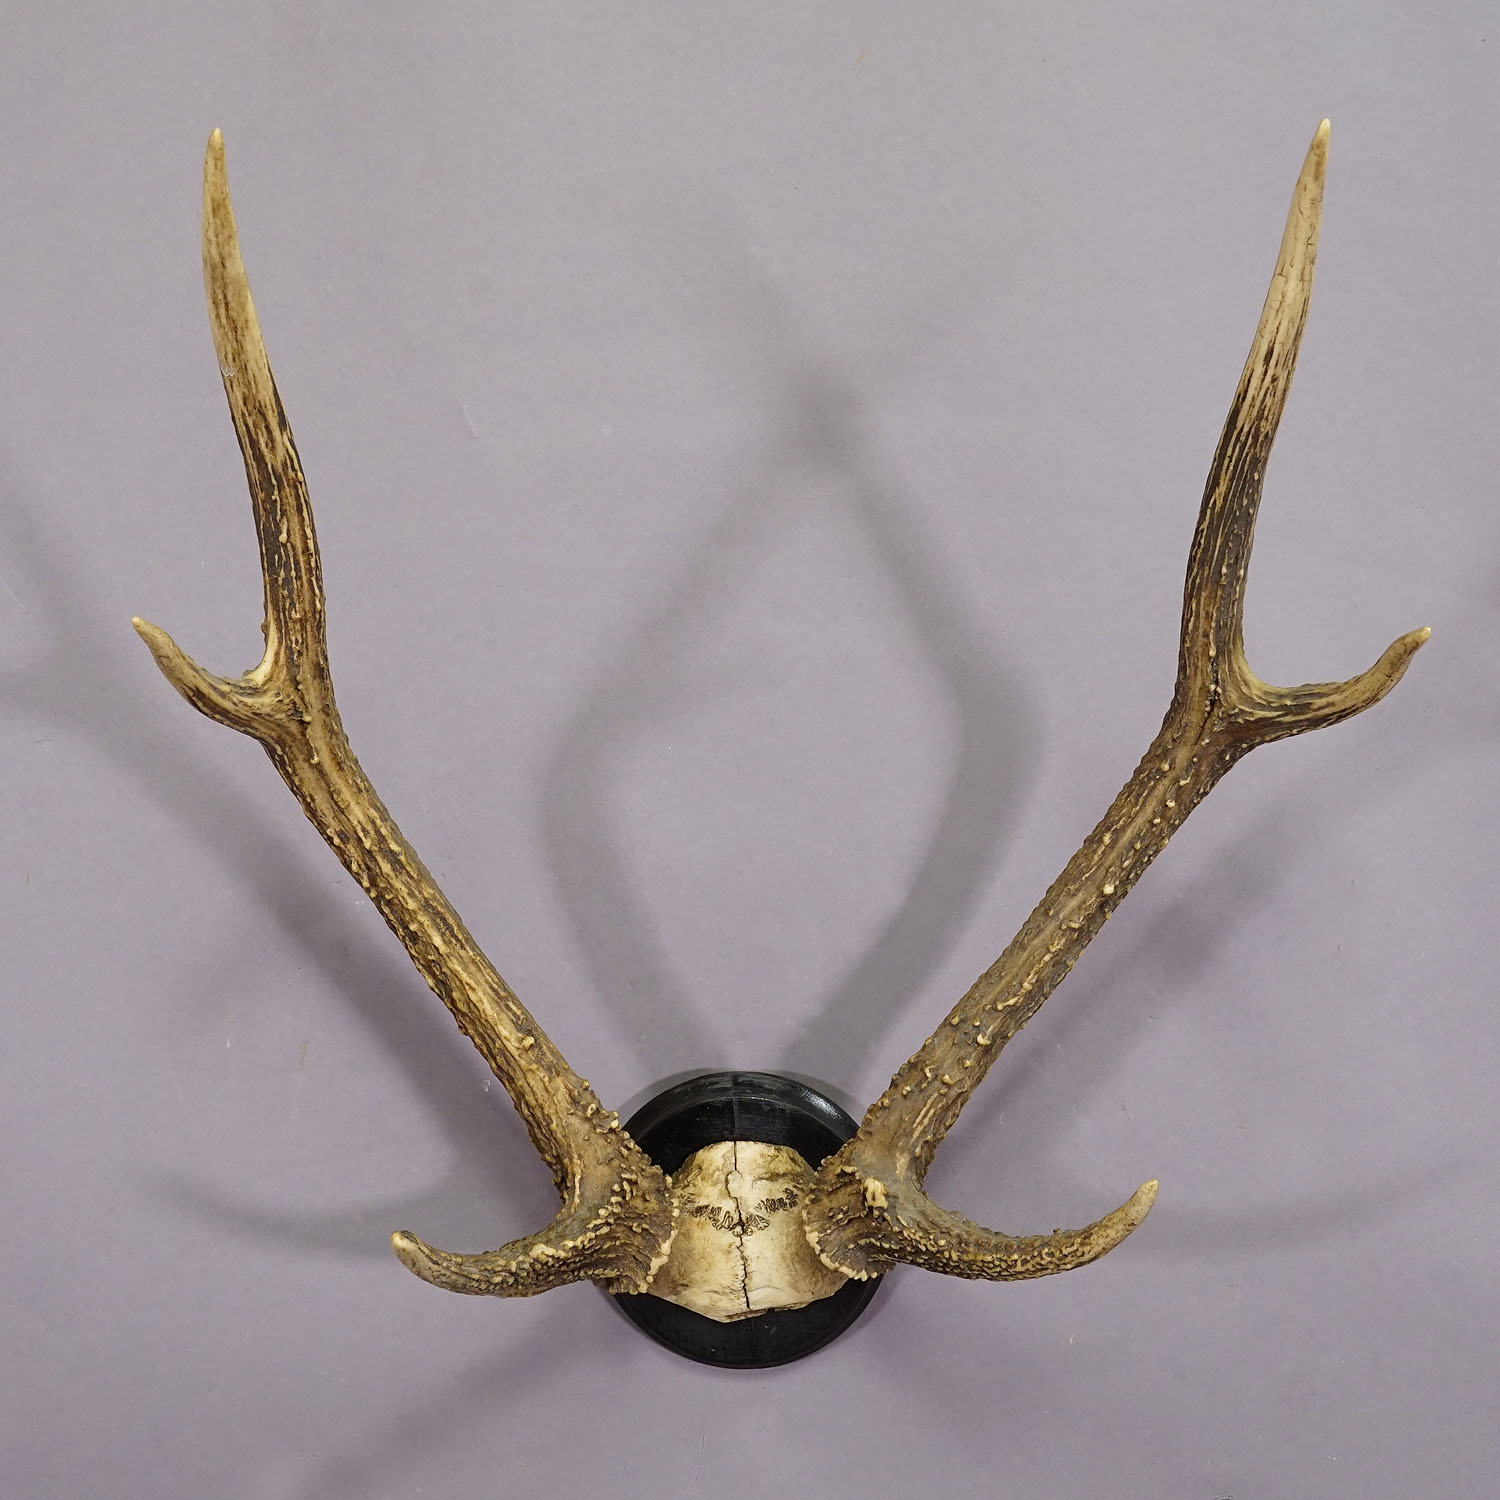 Black Forest 8 Pointer Syberian Deer Trophy on Wooden Plaque ca. 1900s